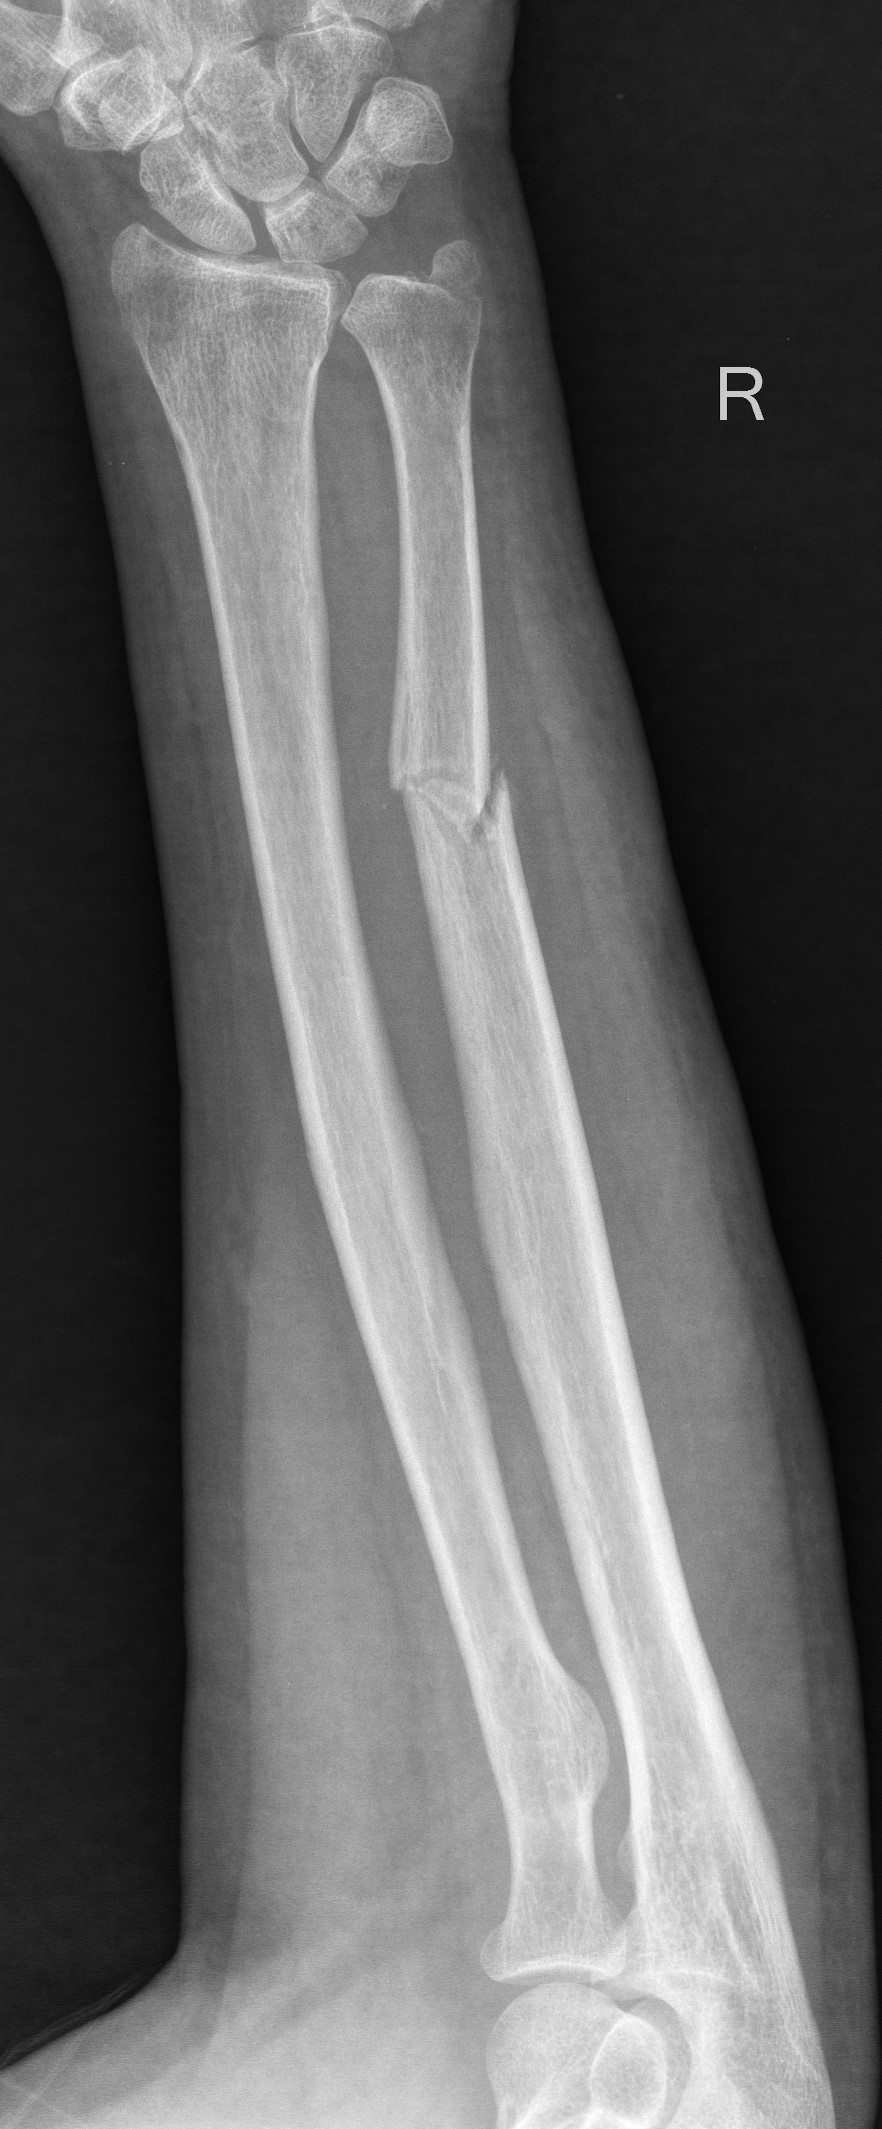 An x-ray of right forearm showing isolated ulna fracture